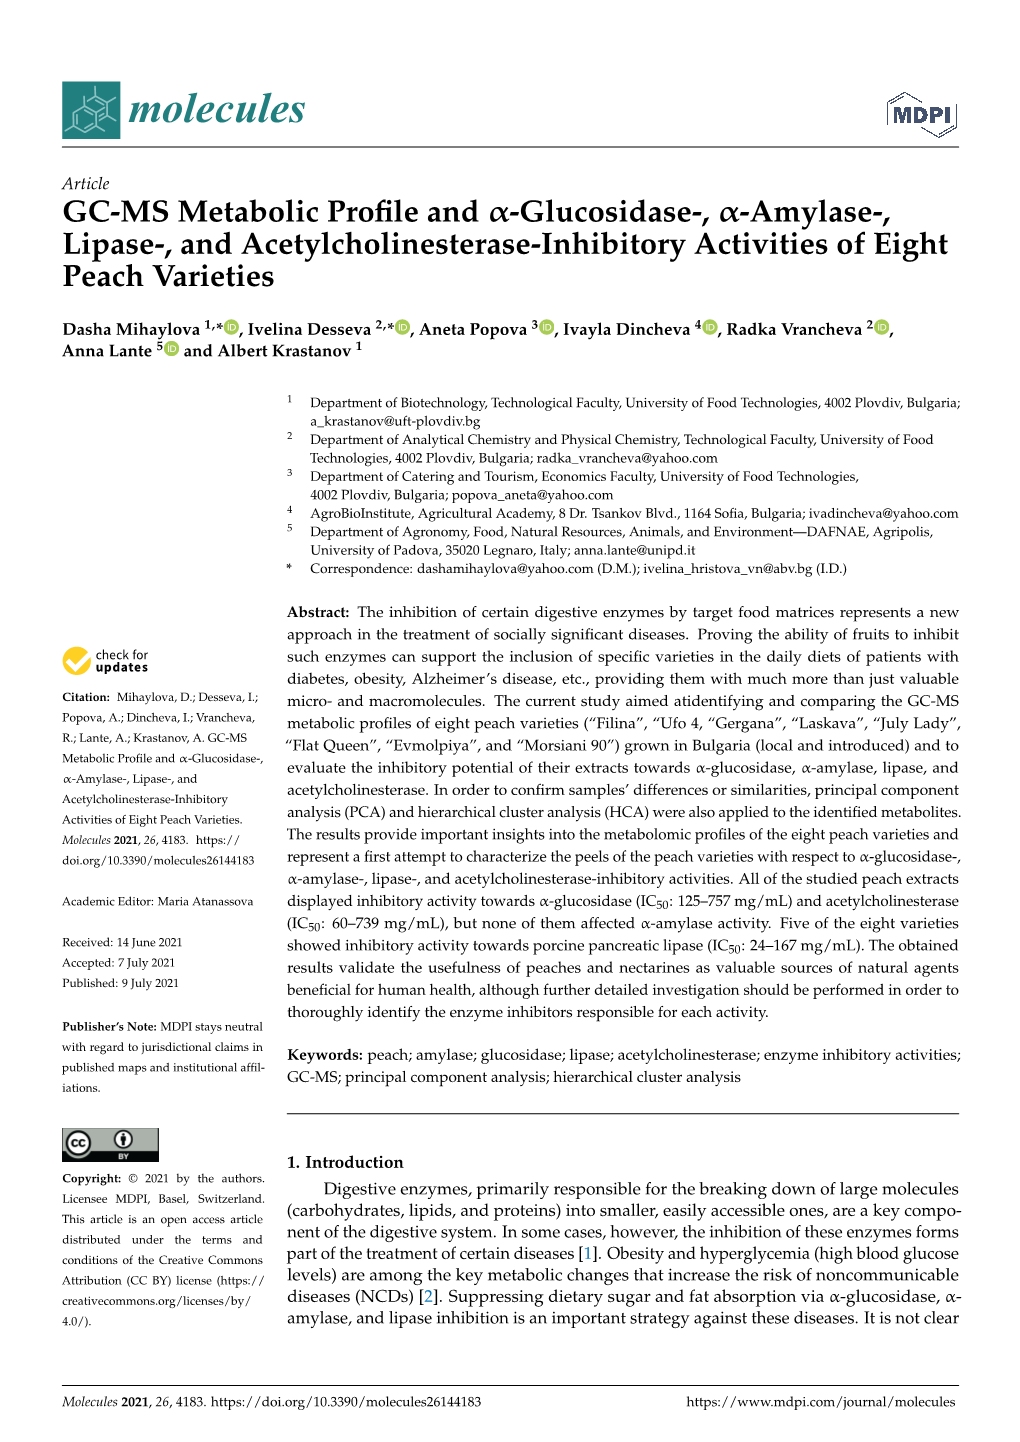 GC-MS Metabolic Profile and -Glucosidase-, -Amylase-, Lipase-, and Acetylcholinesterase-Inhibitory Activities of Eight Peach